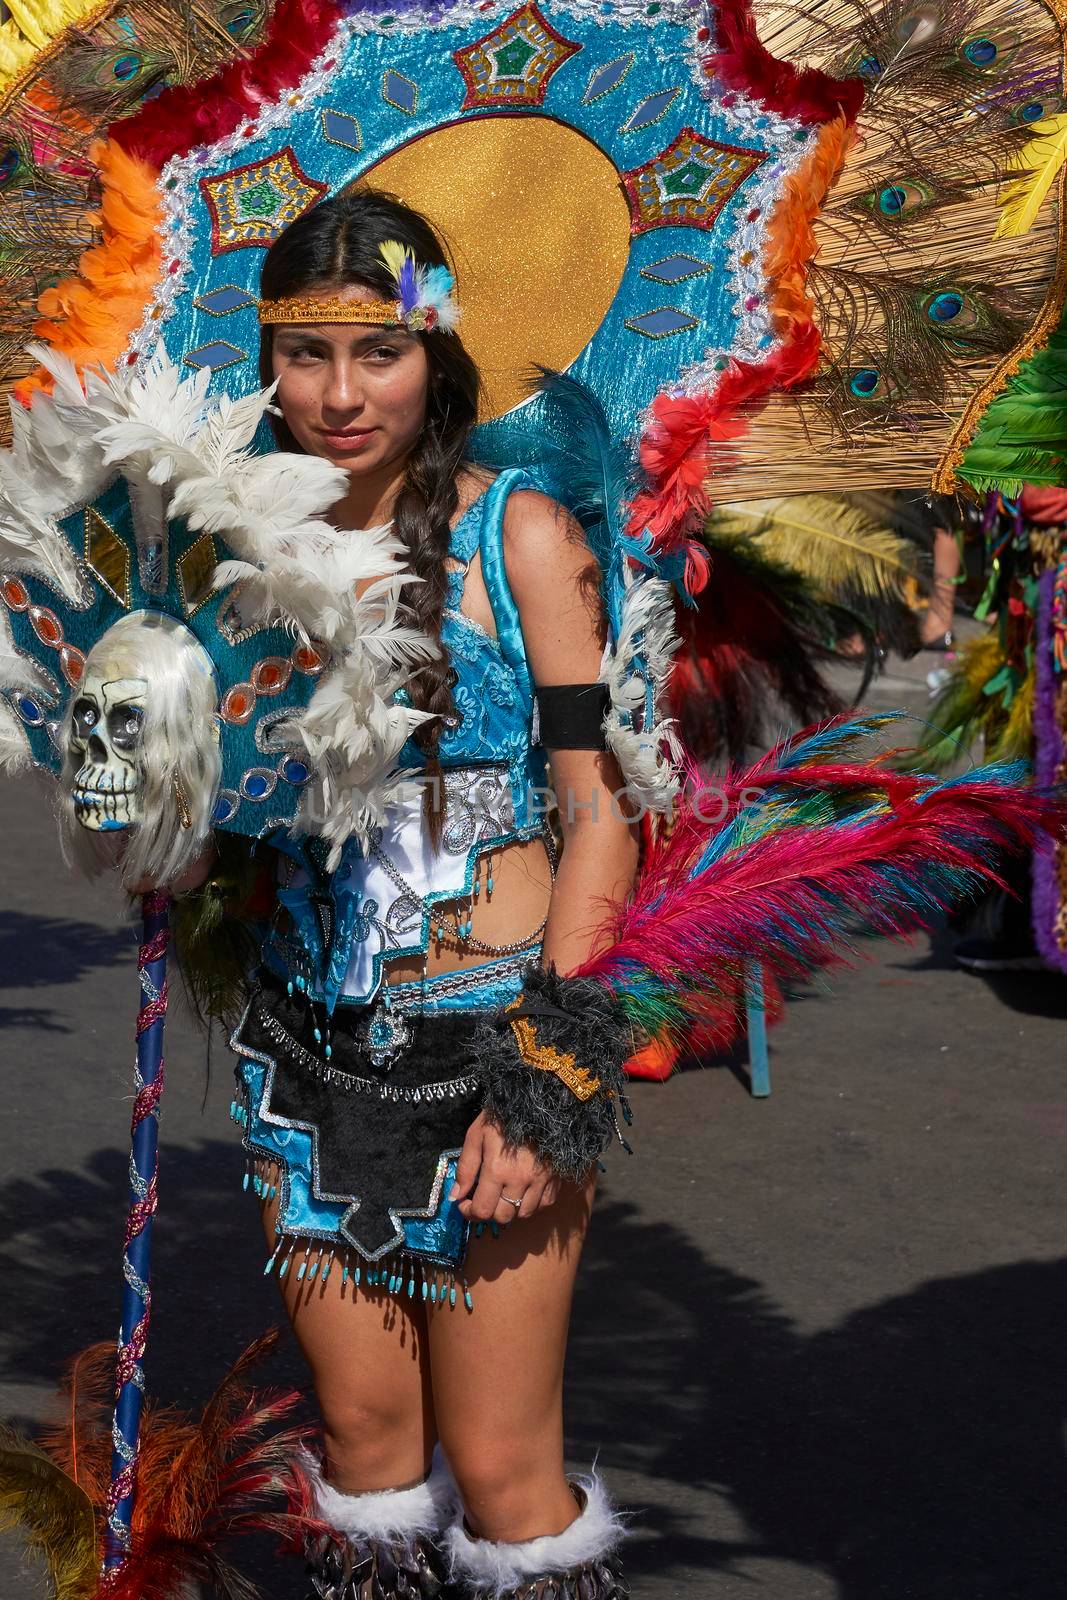 Tobas dancers at the Arica Carnival by JeremyRichards